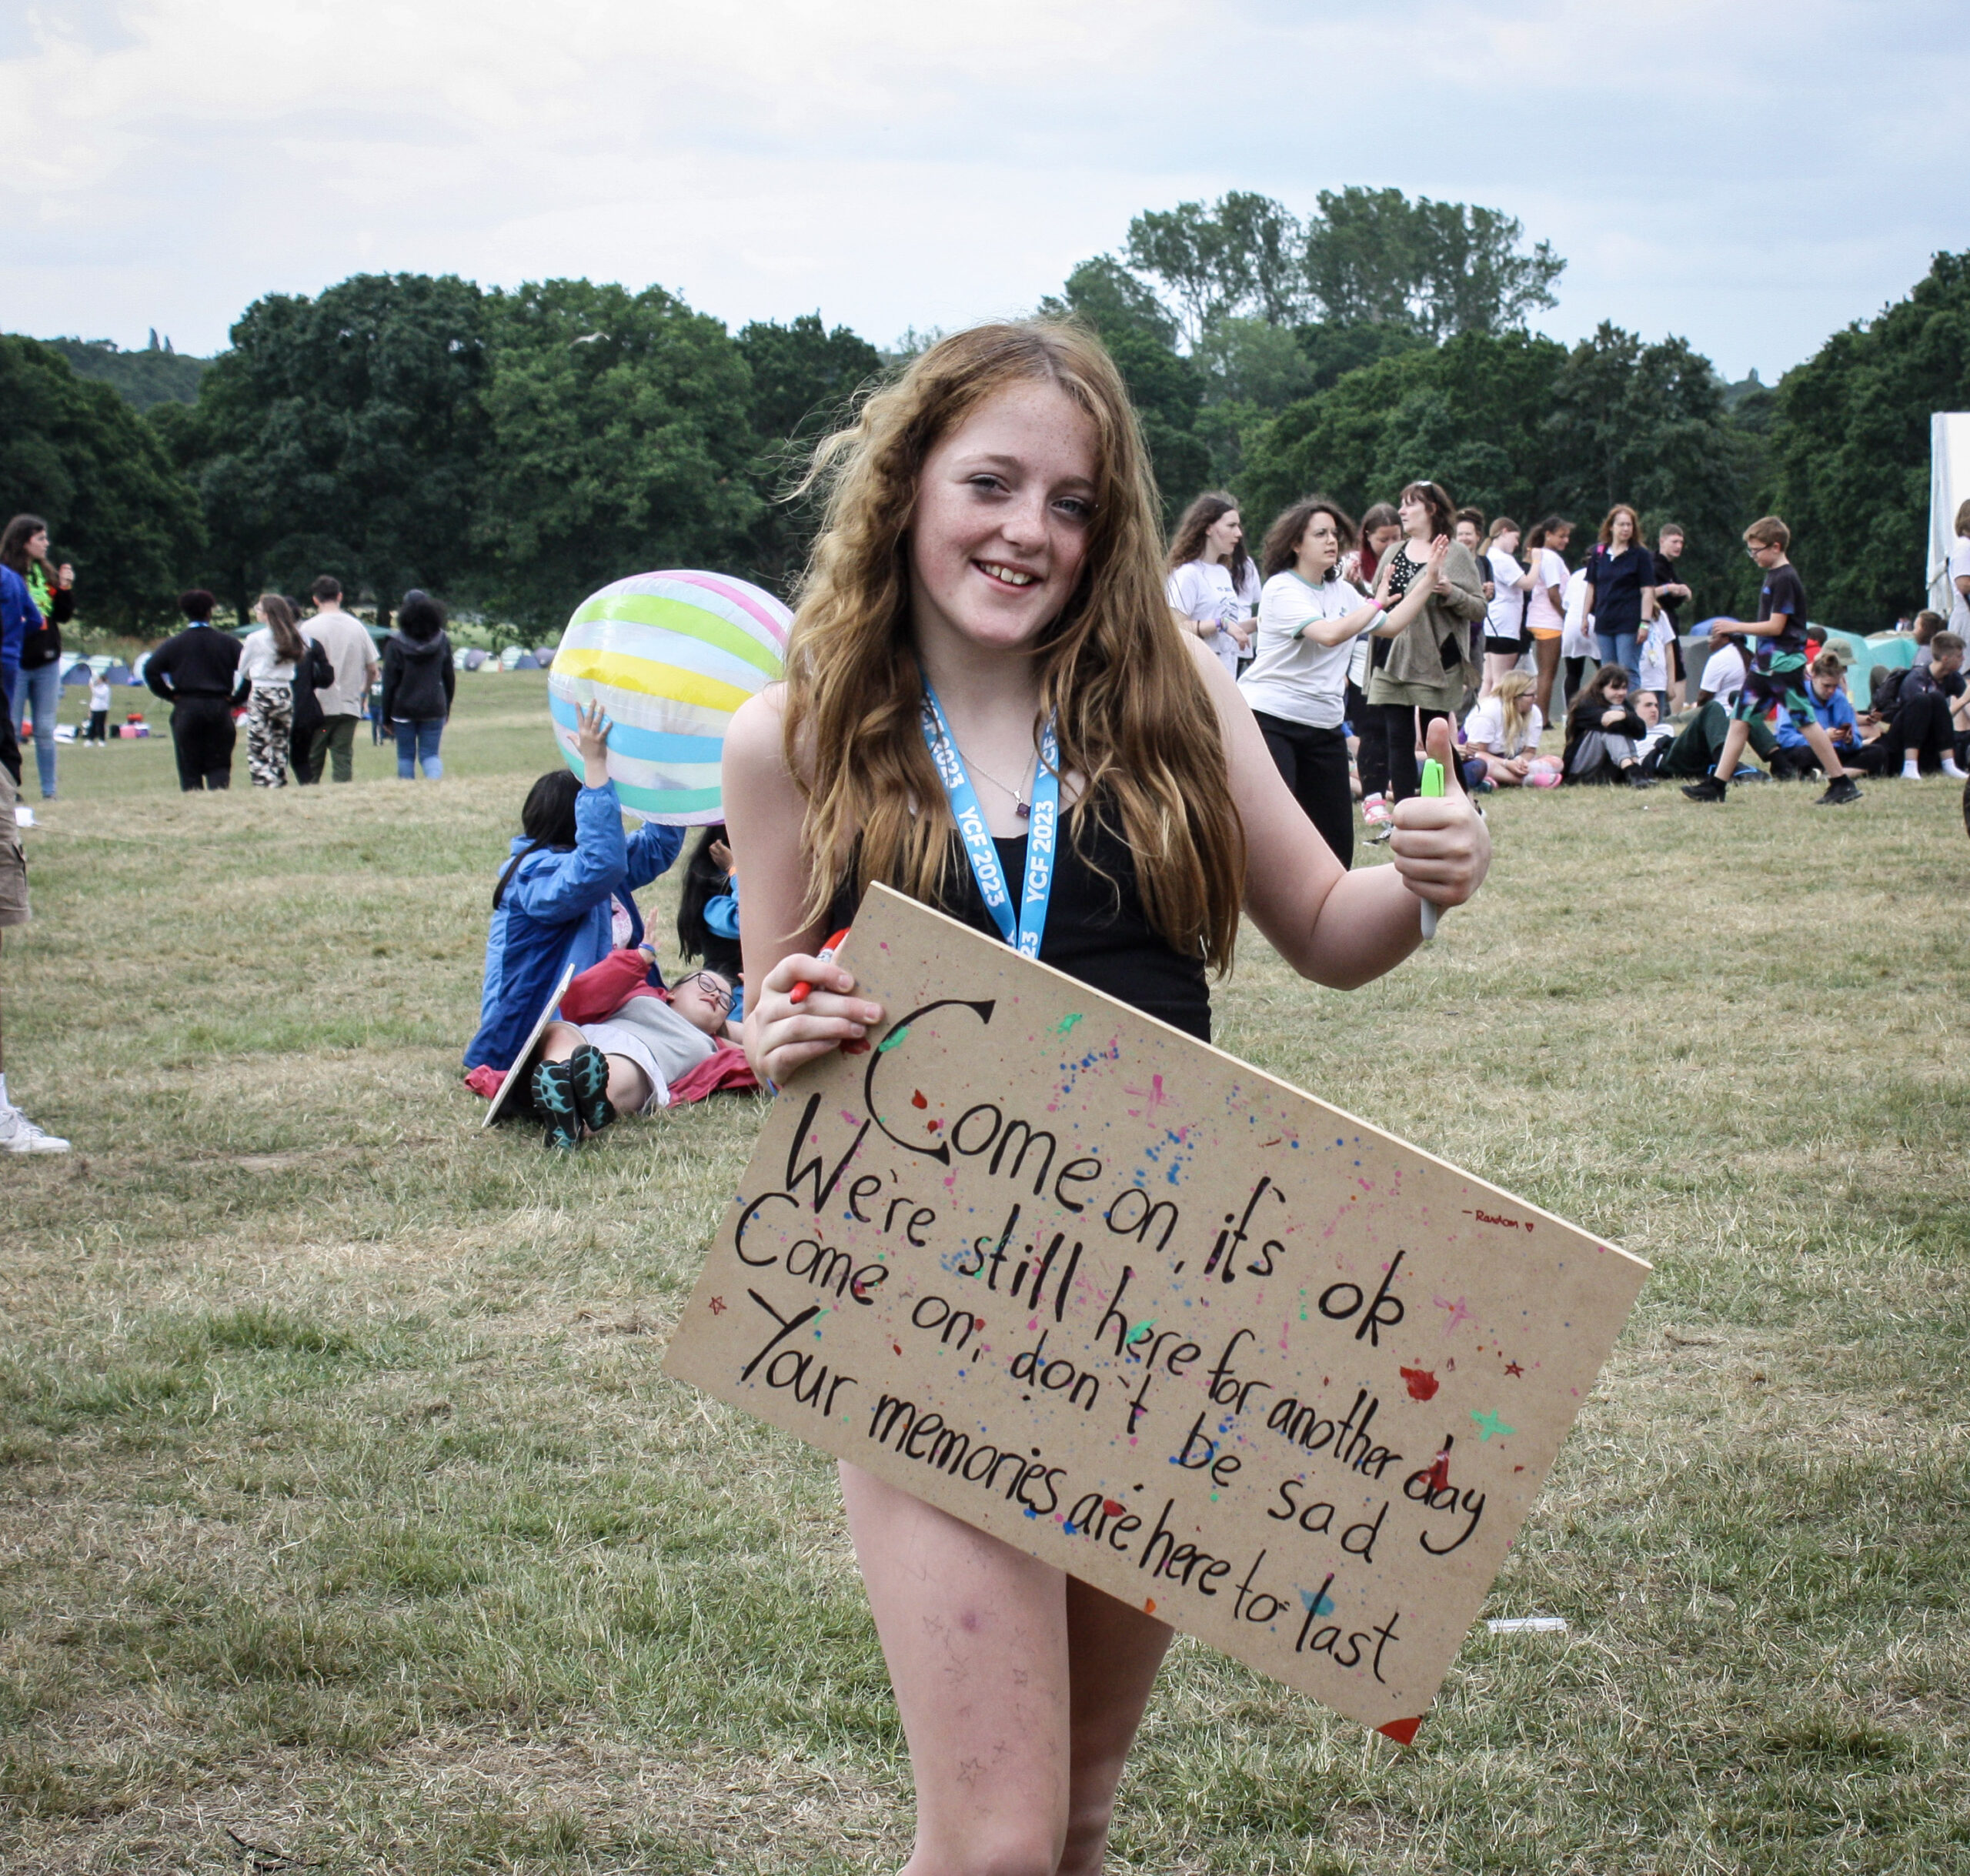 Younger carer at ycf holding a sign